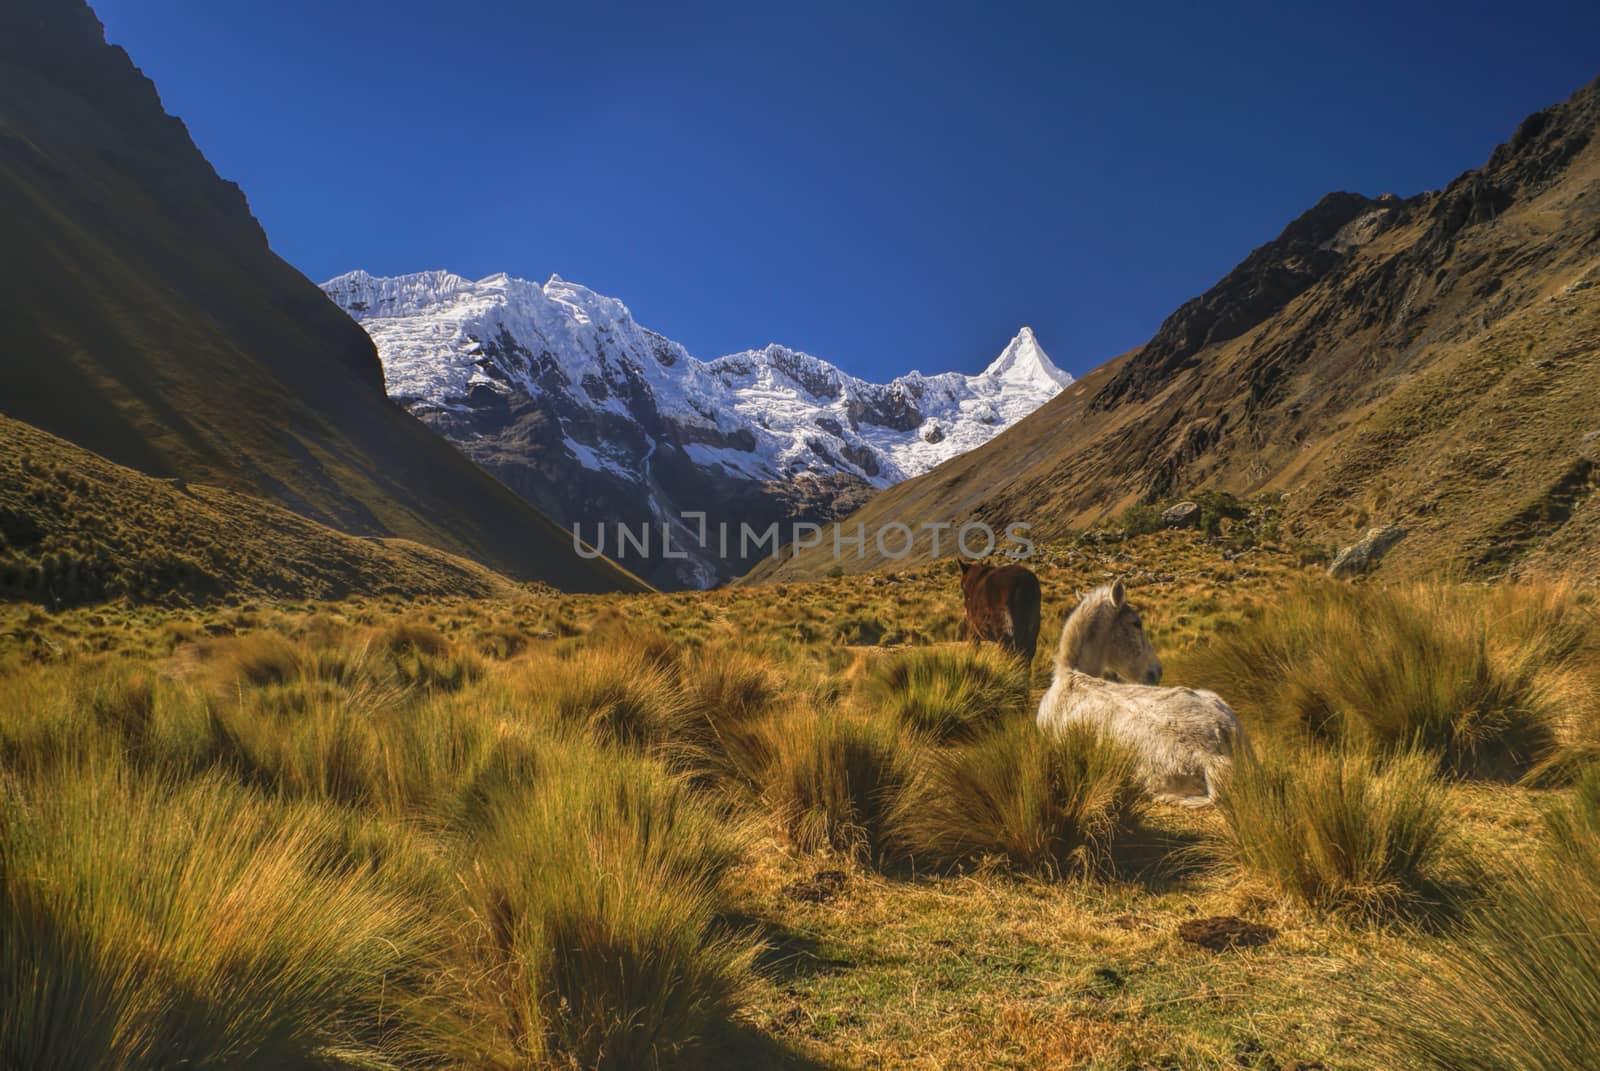 Horses grazing in scenic valley between high mountain peaks in Peruvian Andes